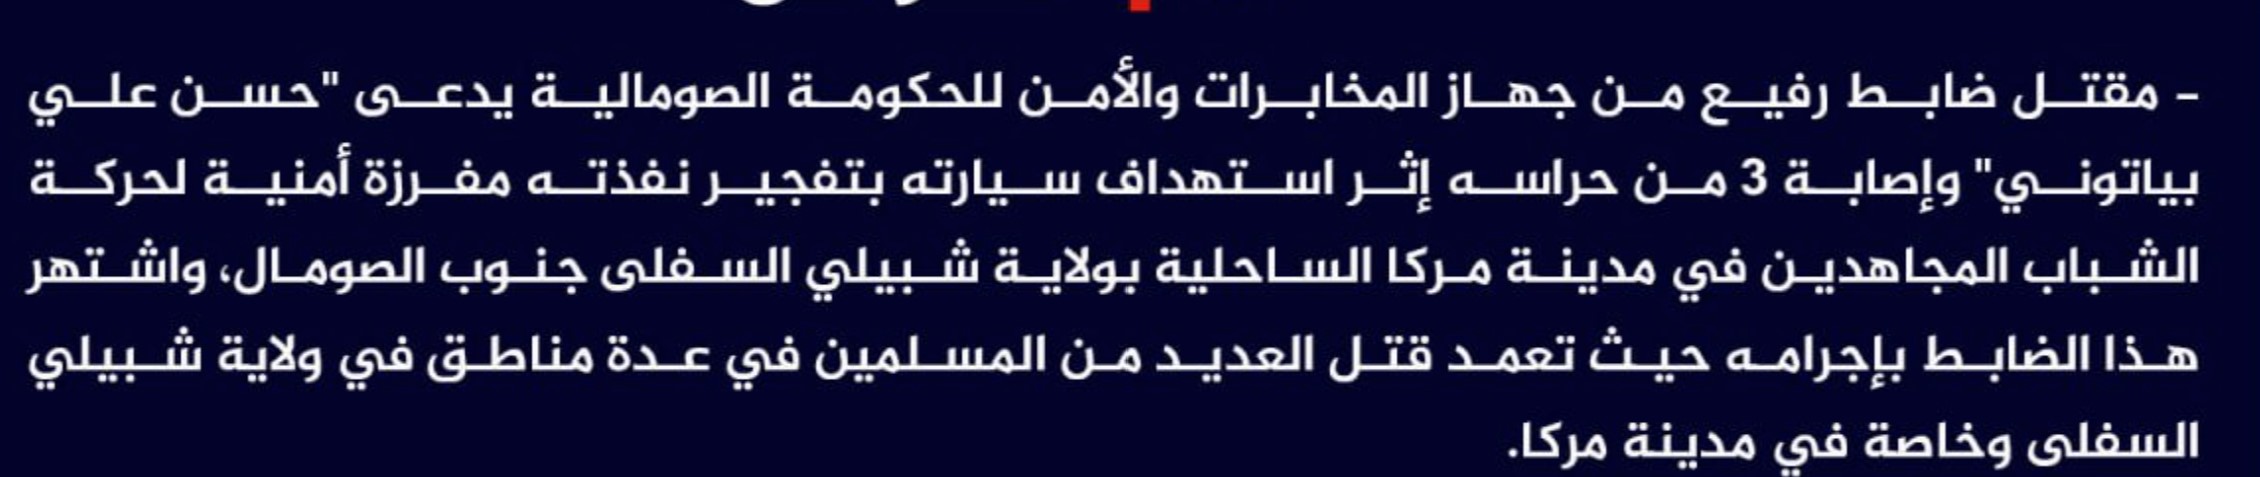 (Claim) al-Shabaab Killed a High-Ranking Officer Who Works for the Somalian Intelligence and Security Unit Named Hasan Ali Bayatoni, and Injured Three of his Guards in an IED attack on His Vehicle in Marka (Merca), Lower Shabelle State, Somalia - 11 June 2023